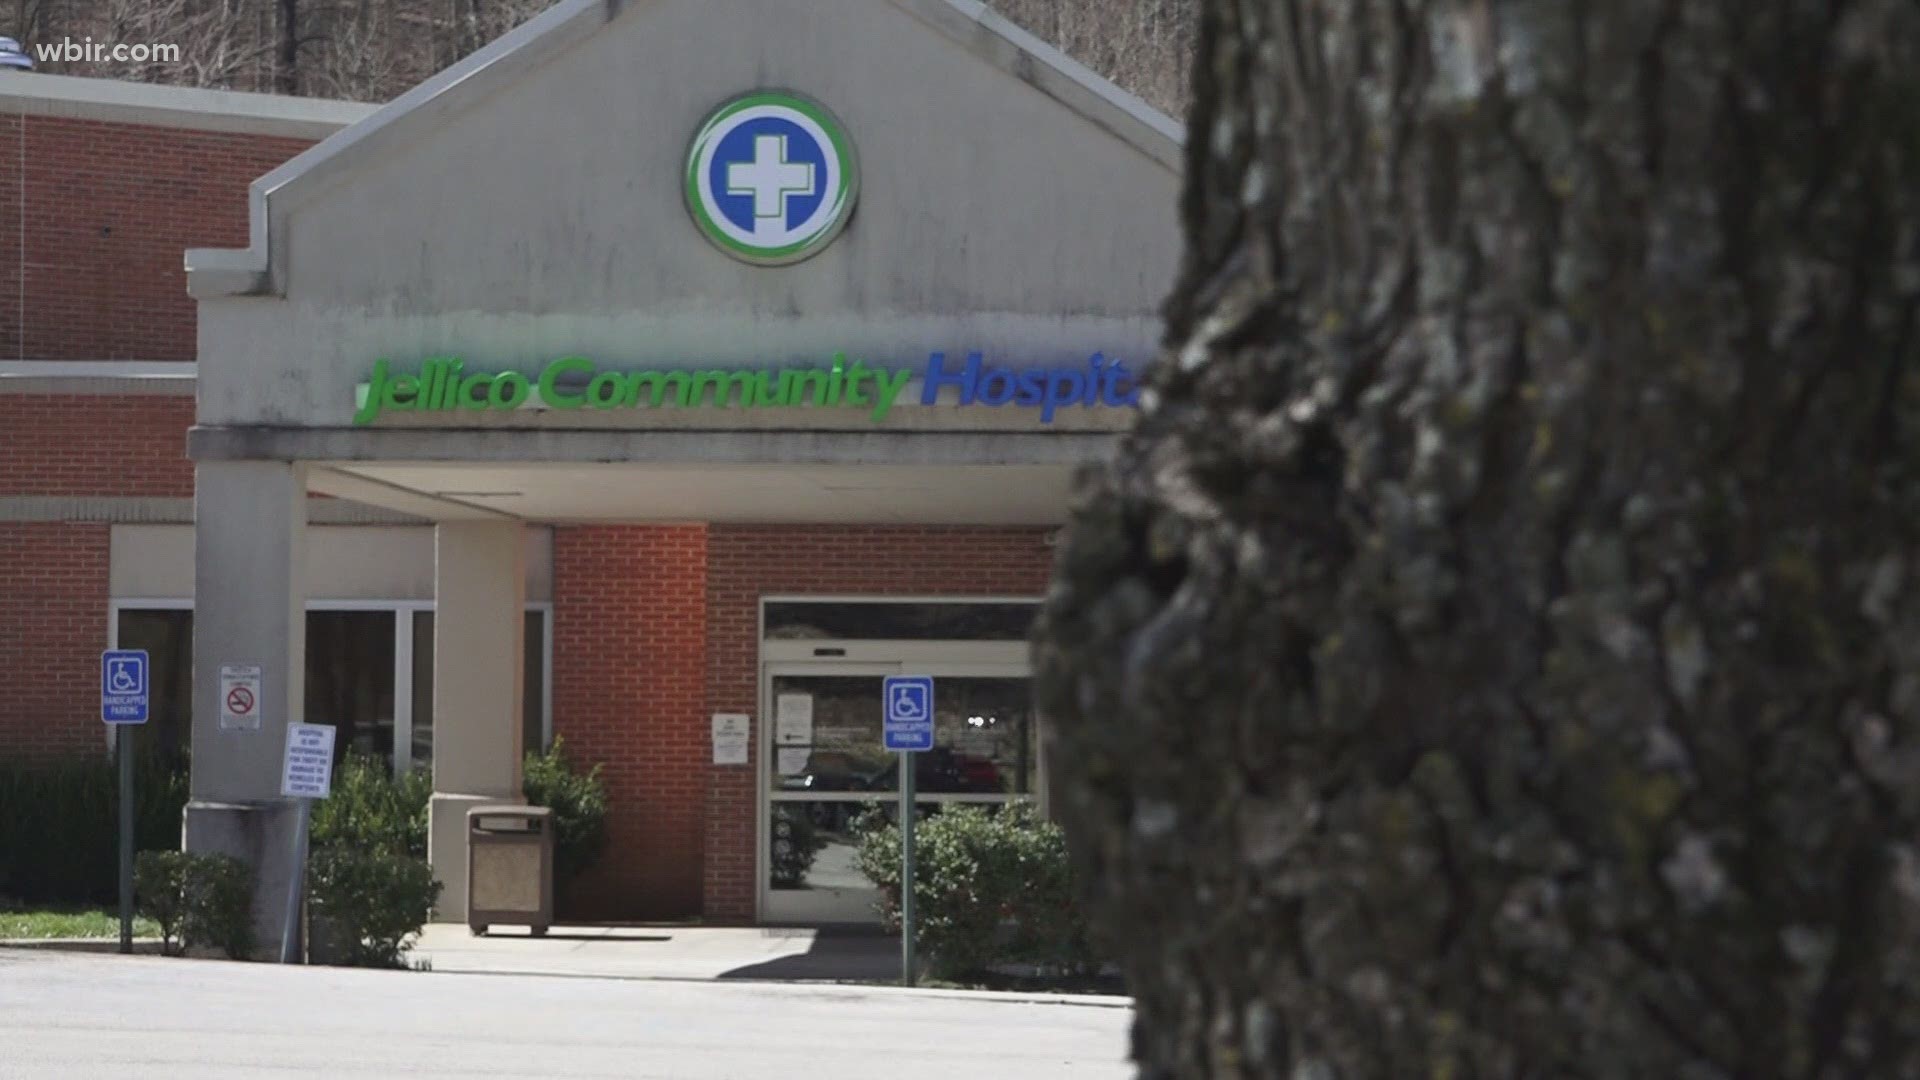 The next nearest hospital to the town on the Kentucky state line is more than 30 minutes away.